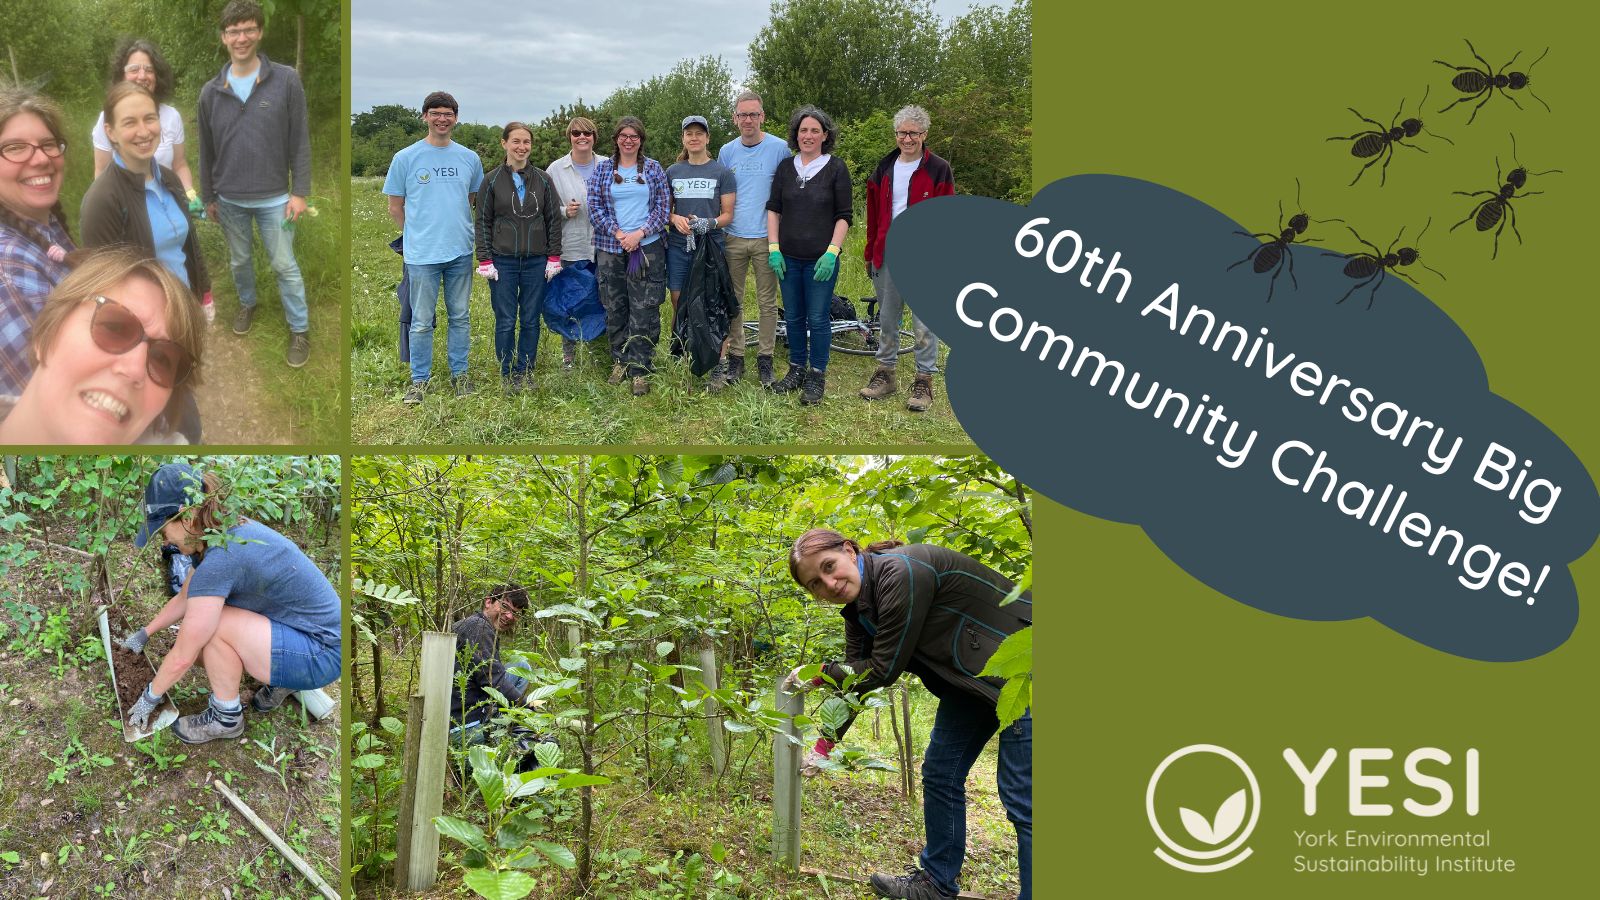 60th Anniversary Big Community Challenge, with images of YESI Team volunteering and some ants